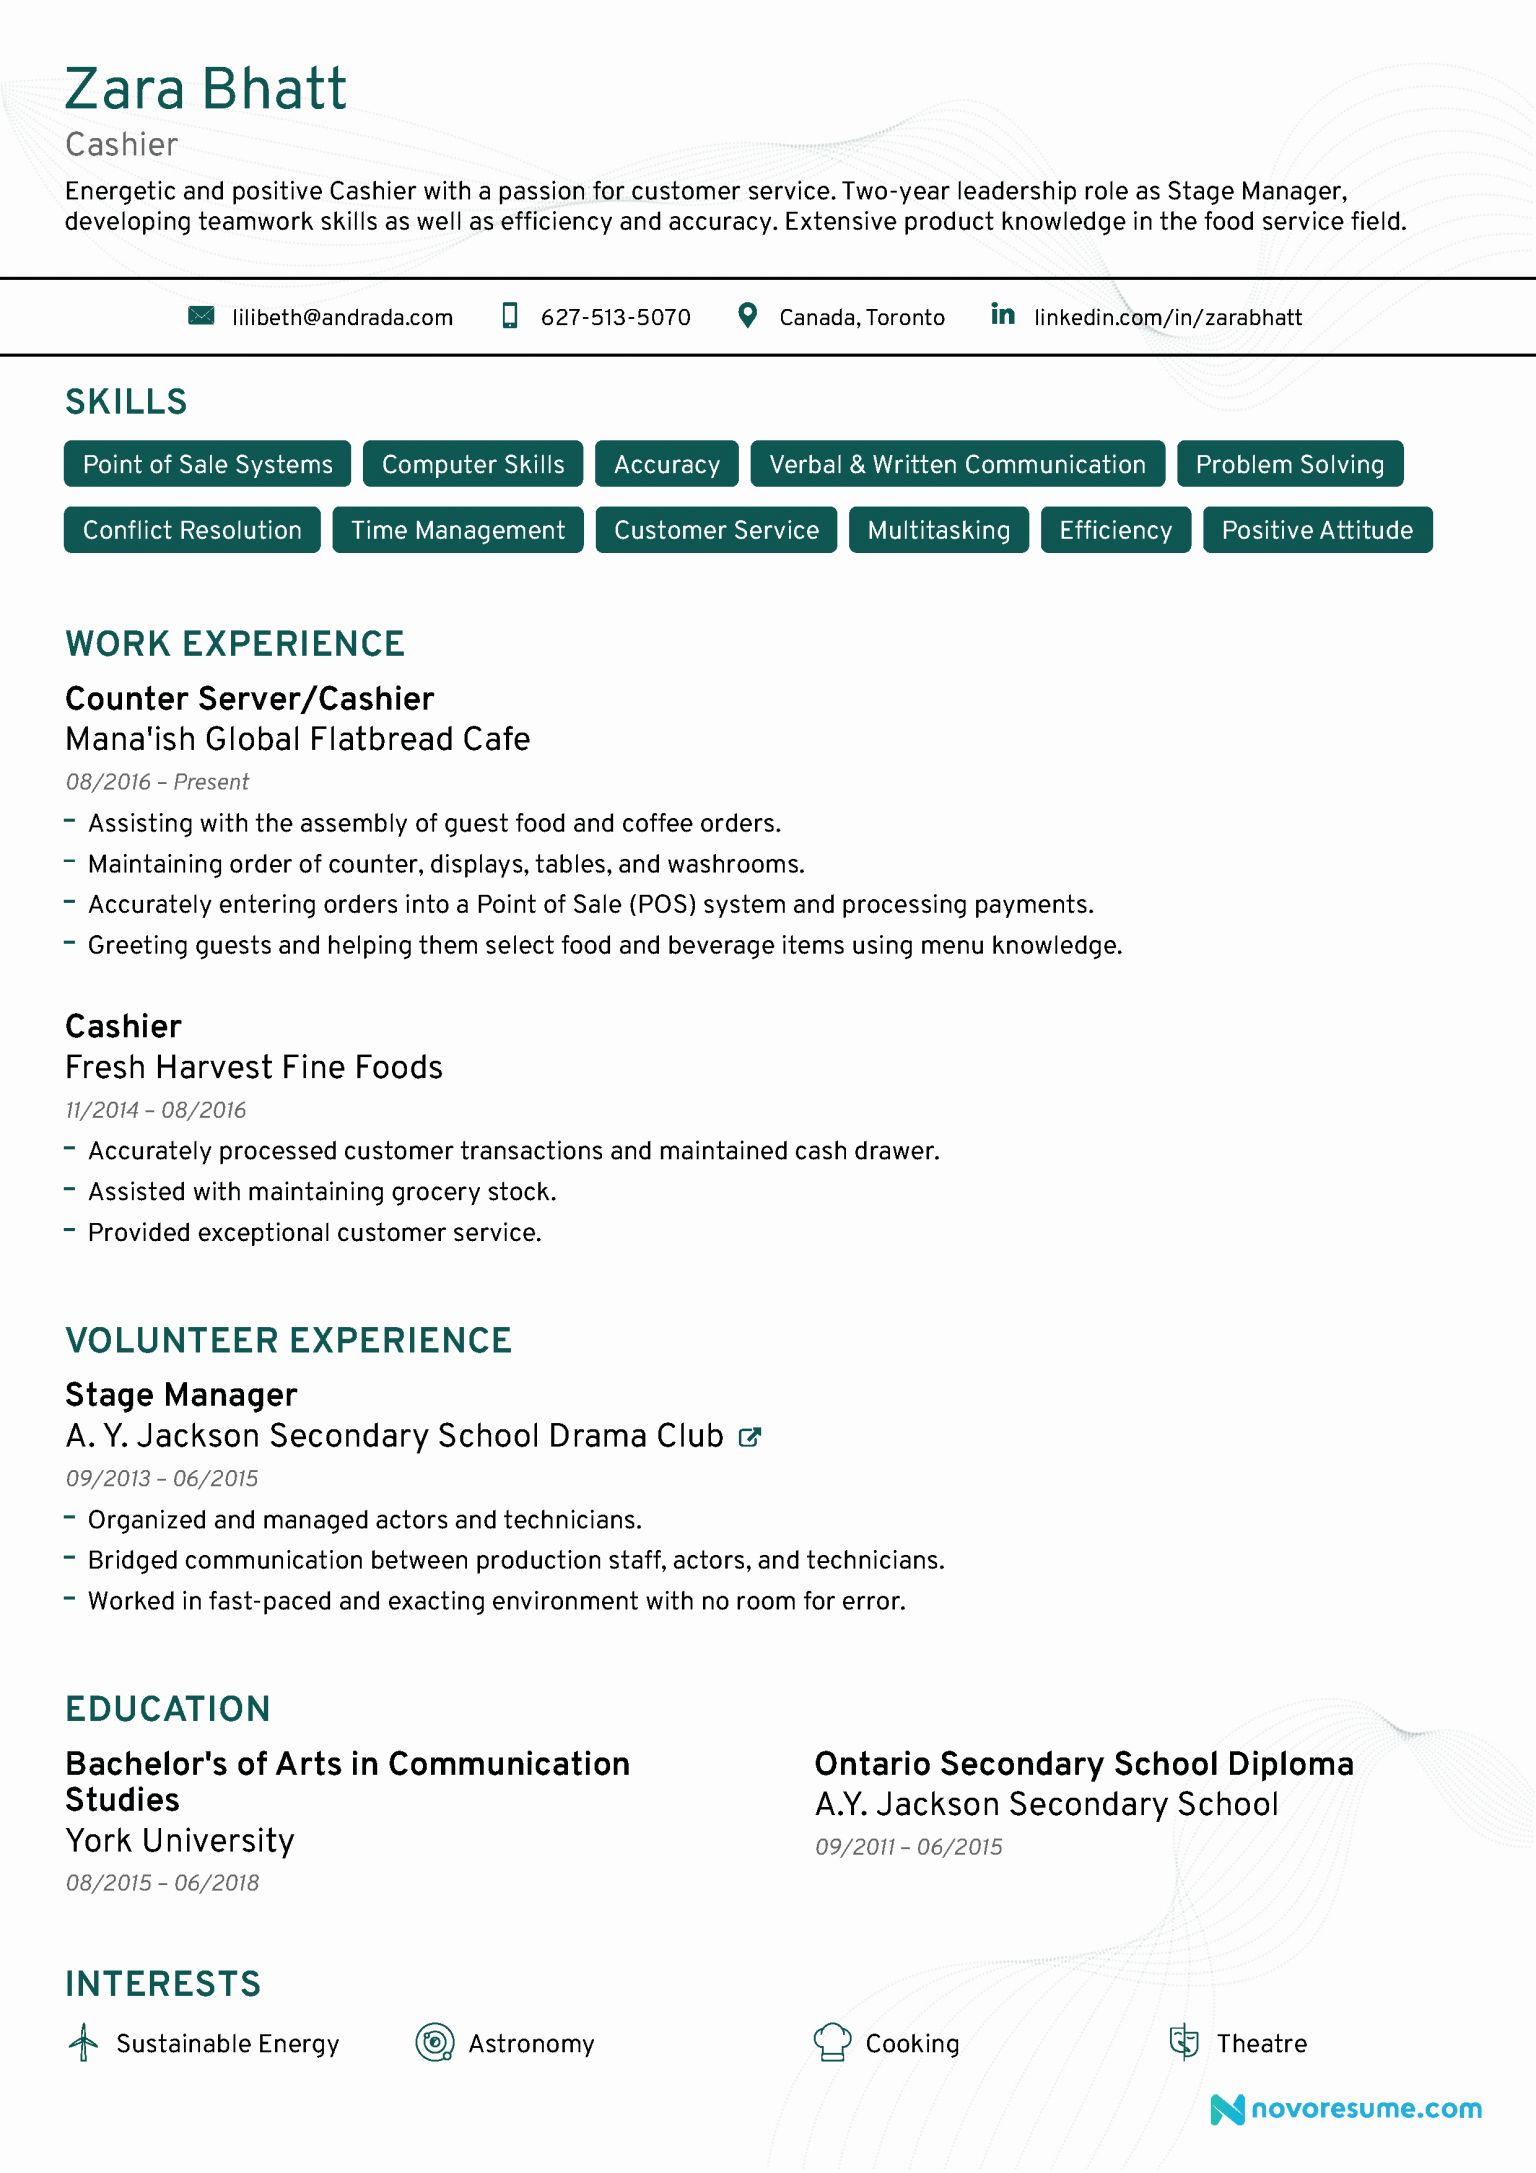 Resume Example For Cashier